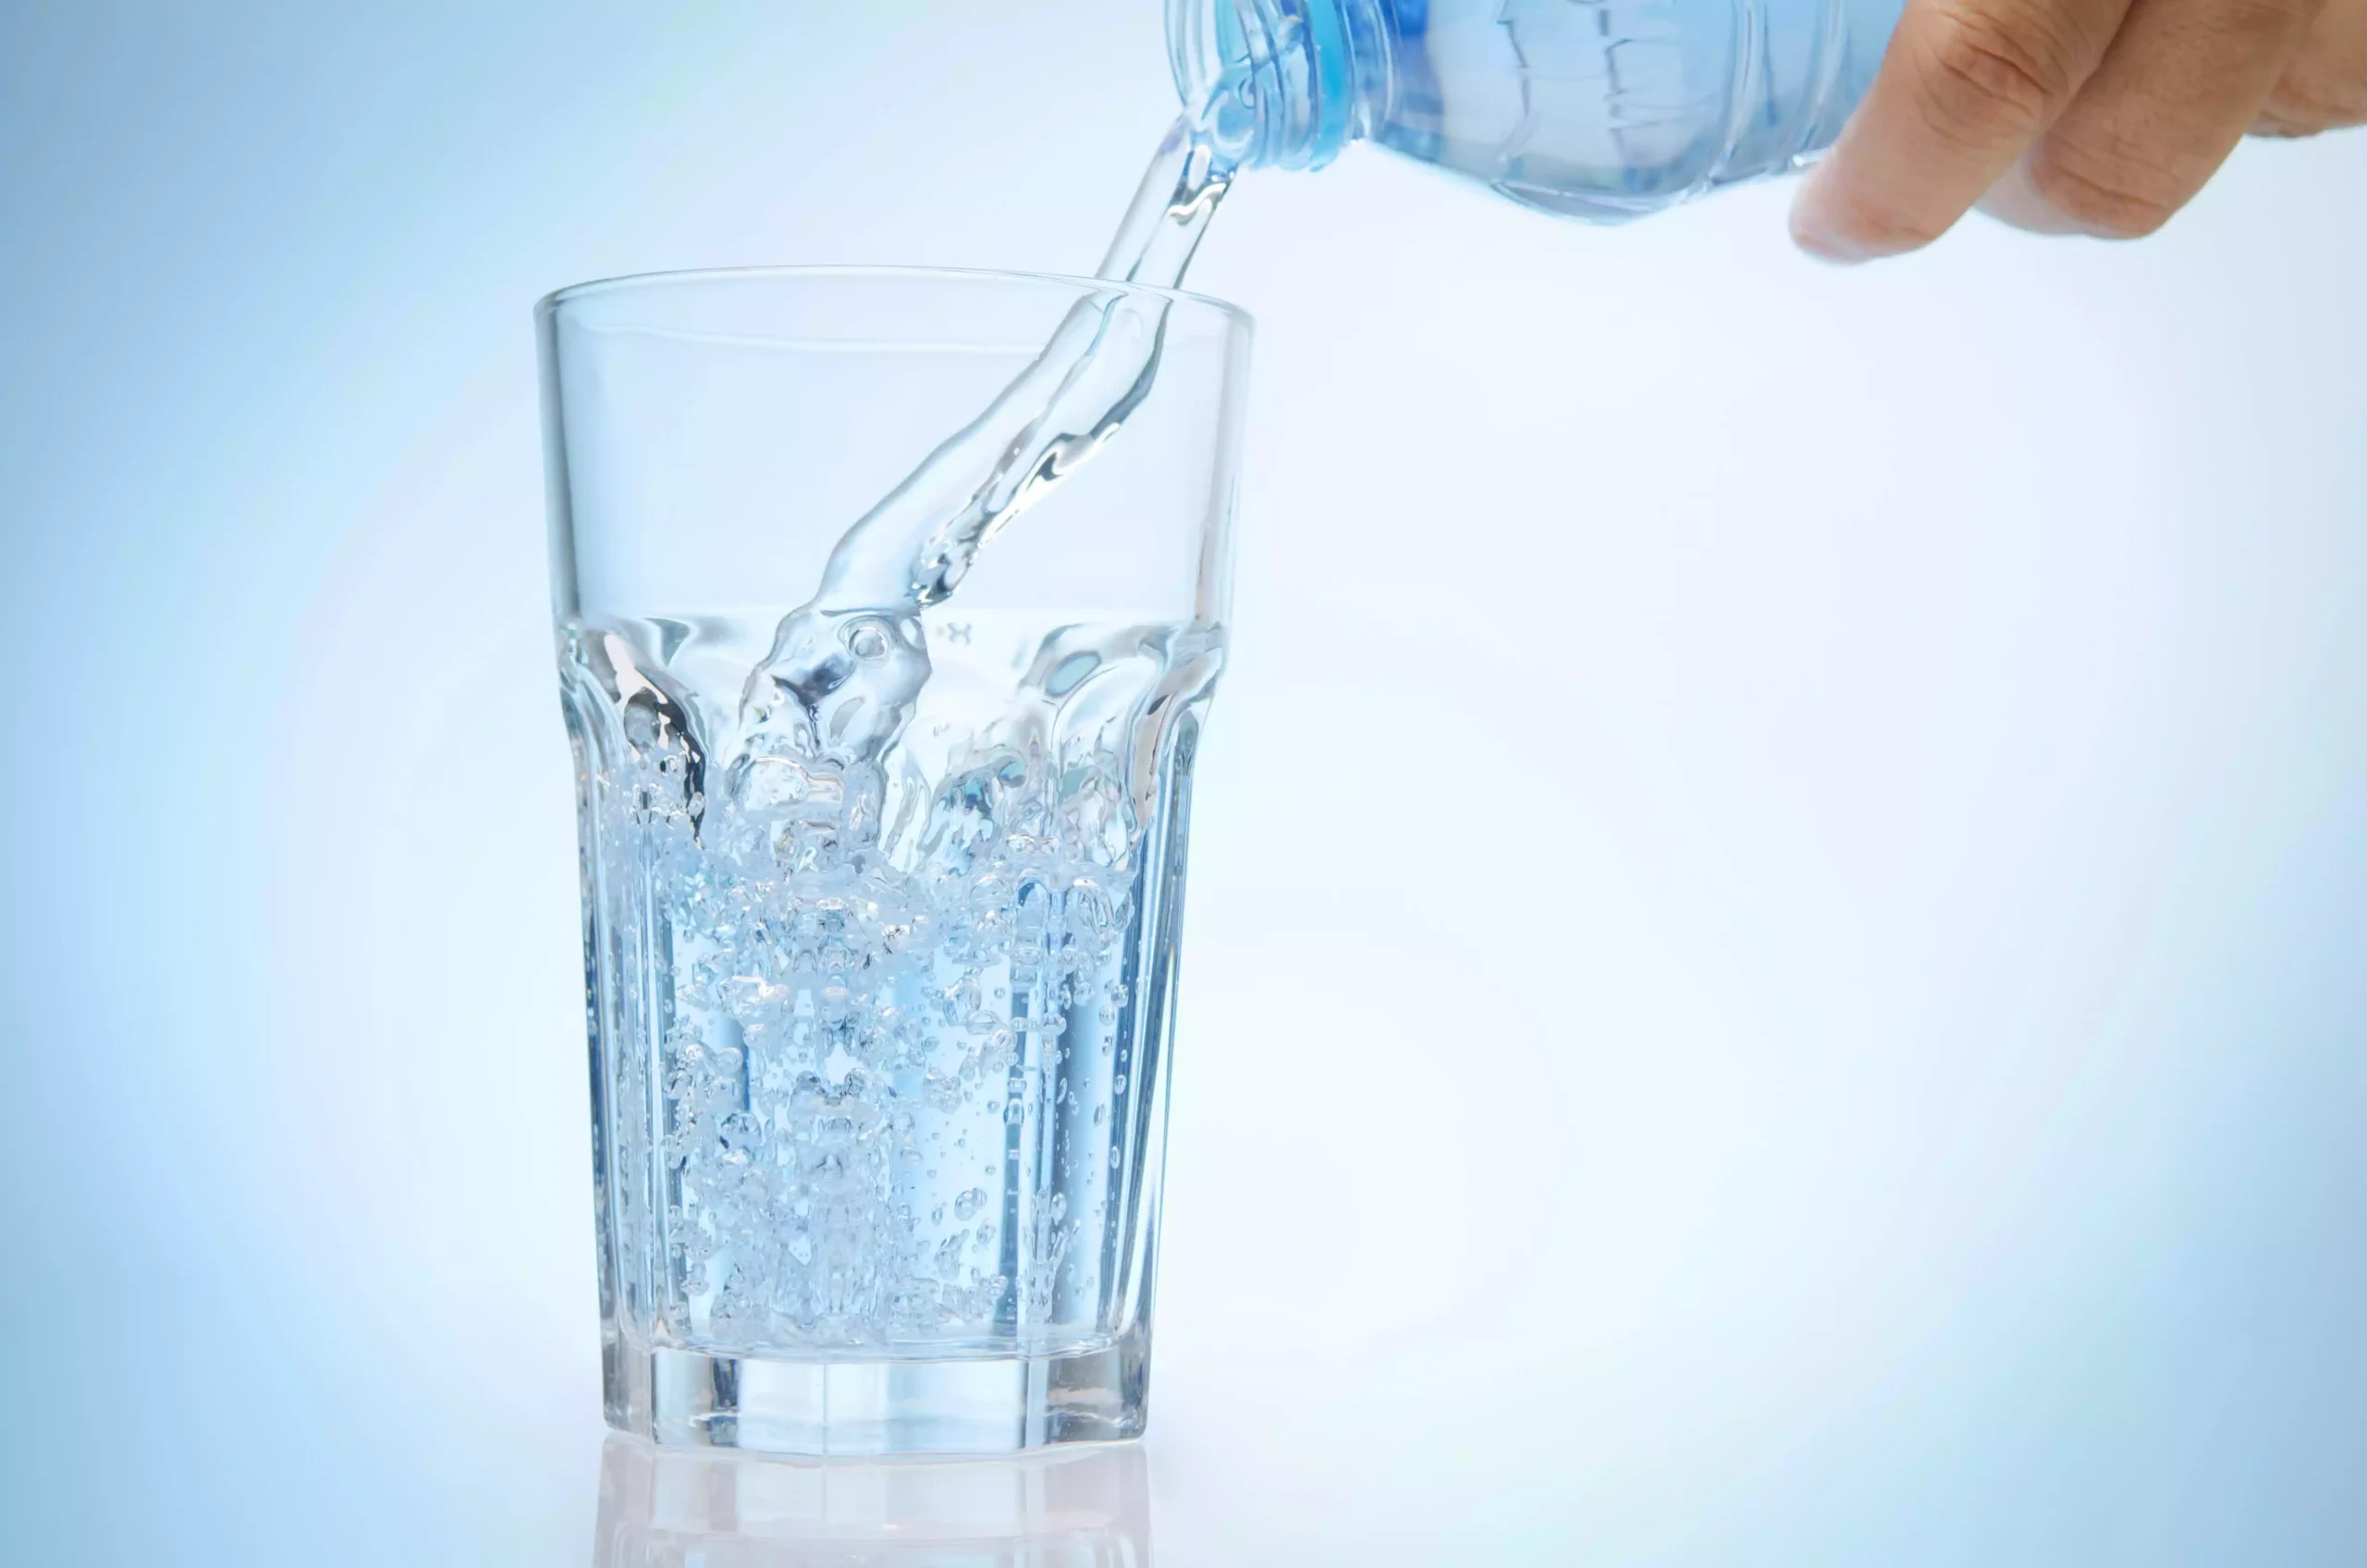 A person pouring water into a glass to alleviate dry mouth.